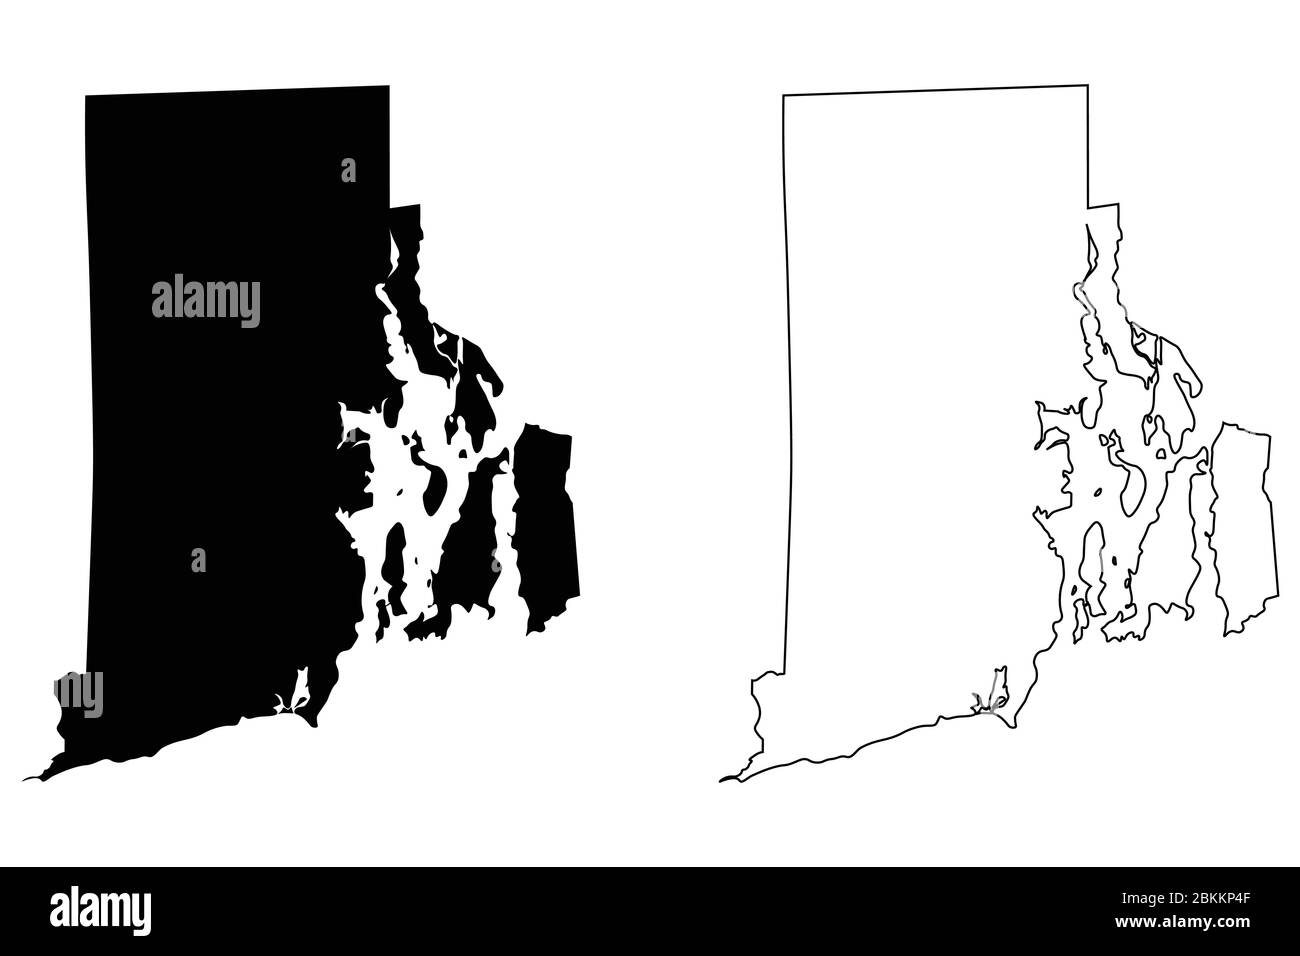 Rhode Island RI state Maps. Black silhouette and outline isolated on a white background. EPS Vector Stock Vector